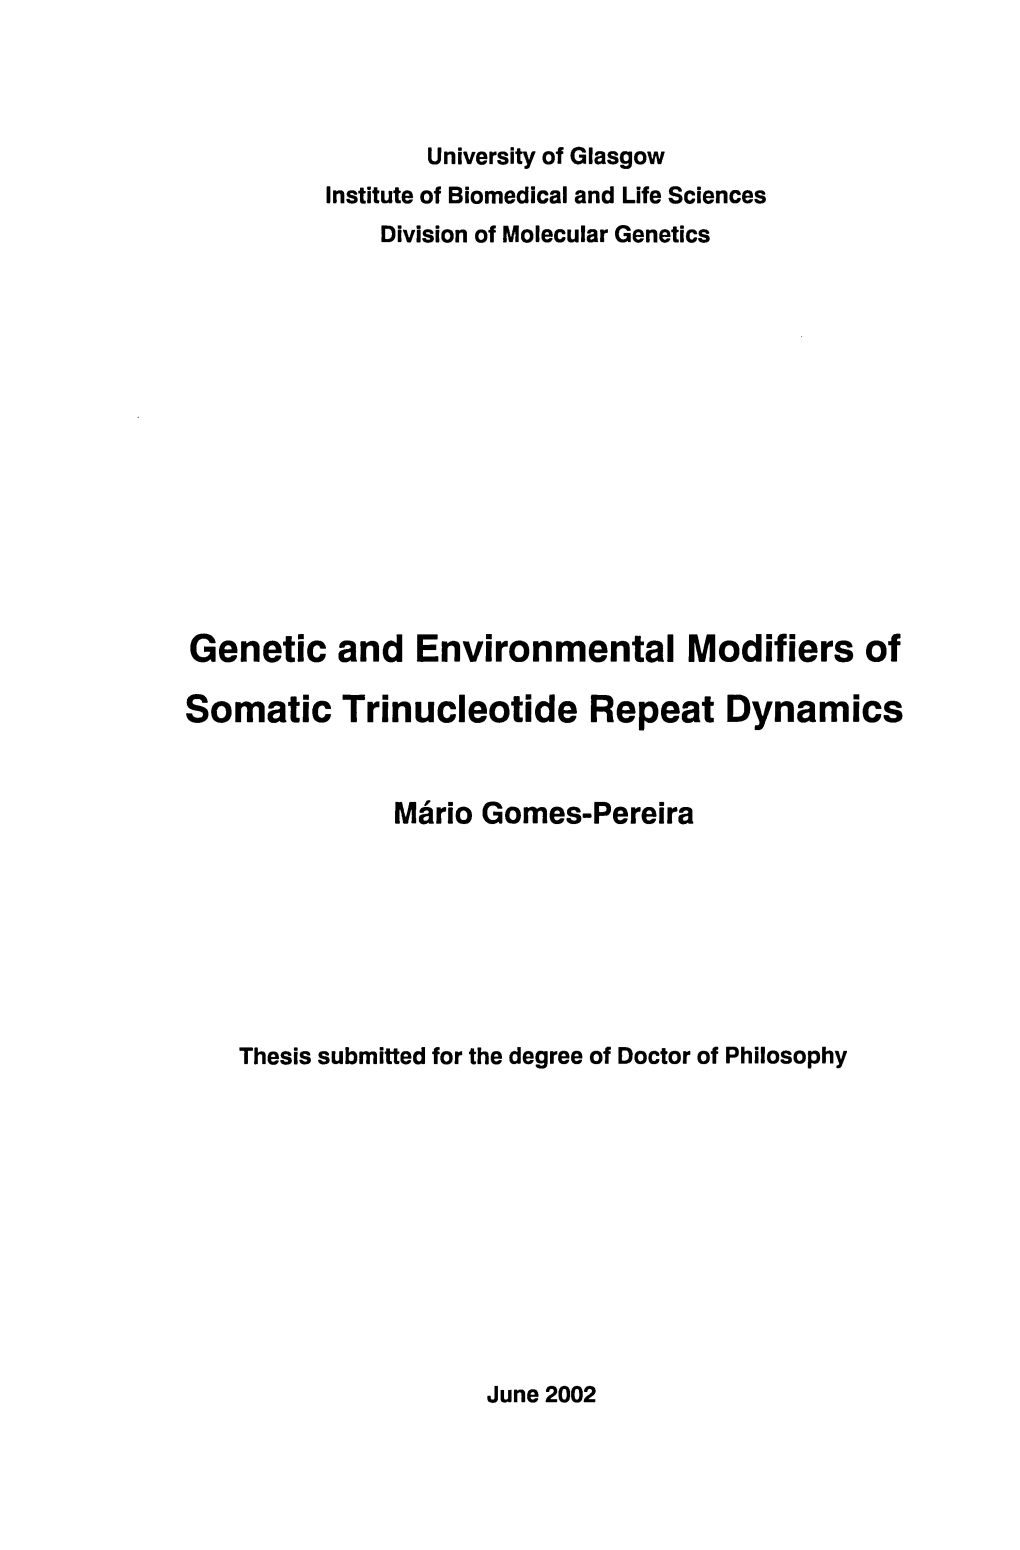 Genetic and Environmental Modifiers of Somatic Trinucleotide Repeat Dynamics